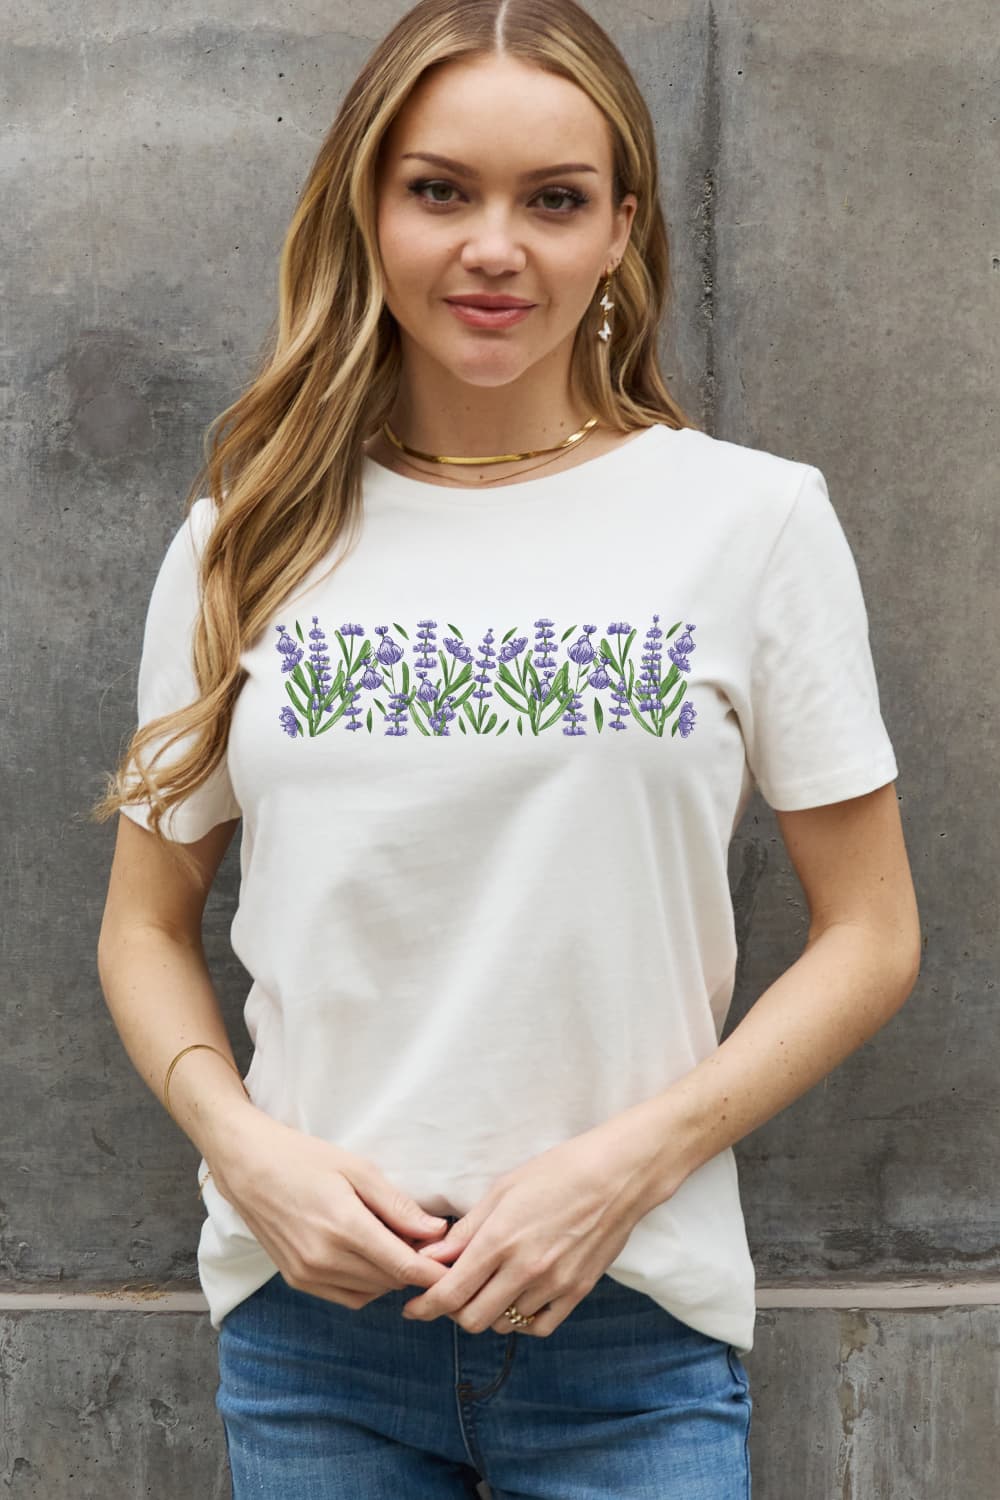 Dim Gray Simply Love Full Size Flower Graphic Cotton Tee